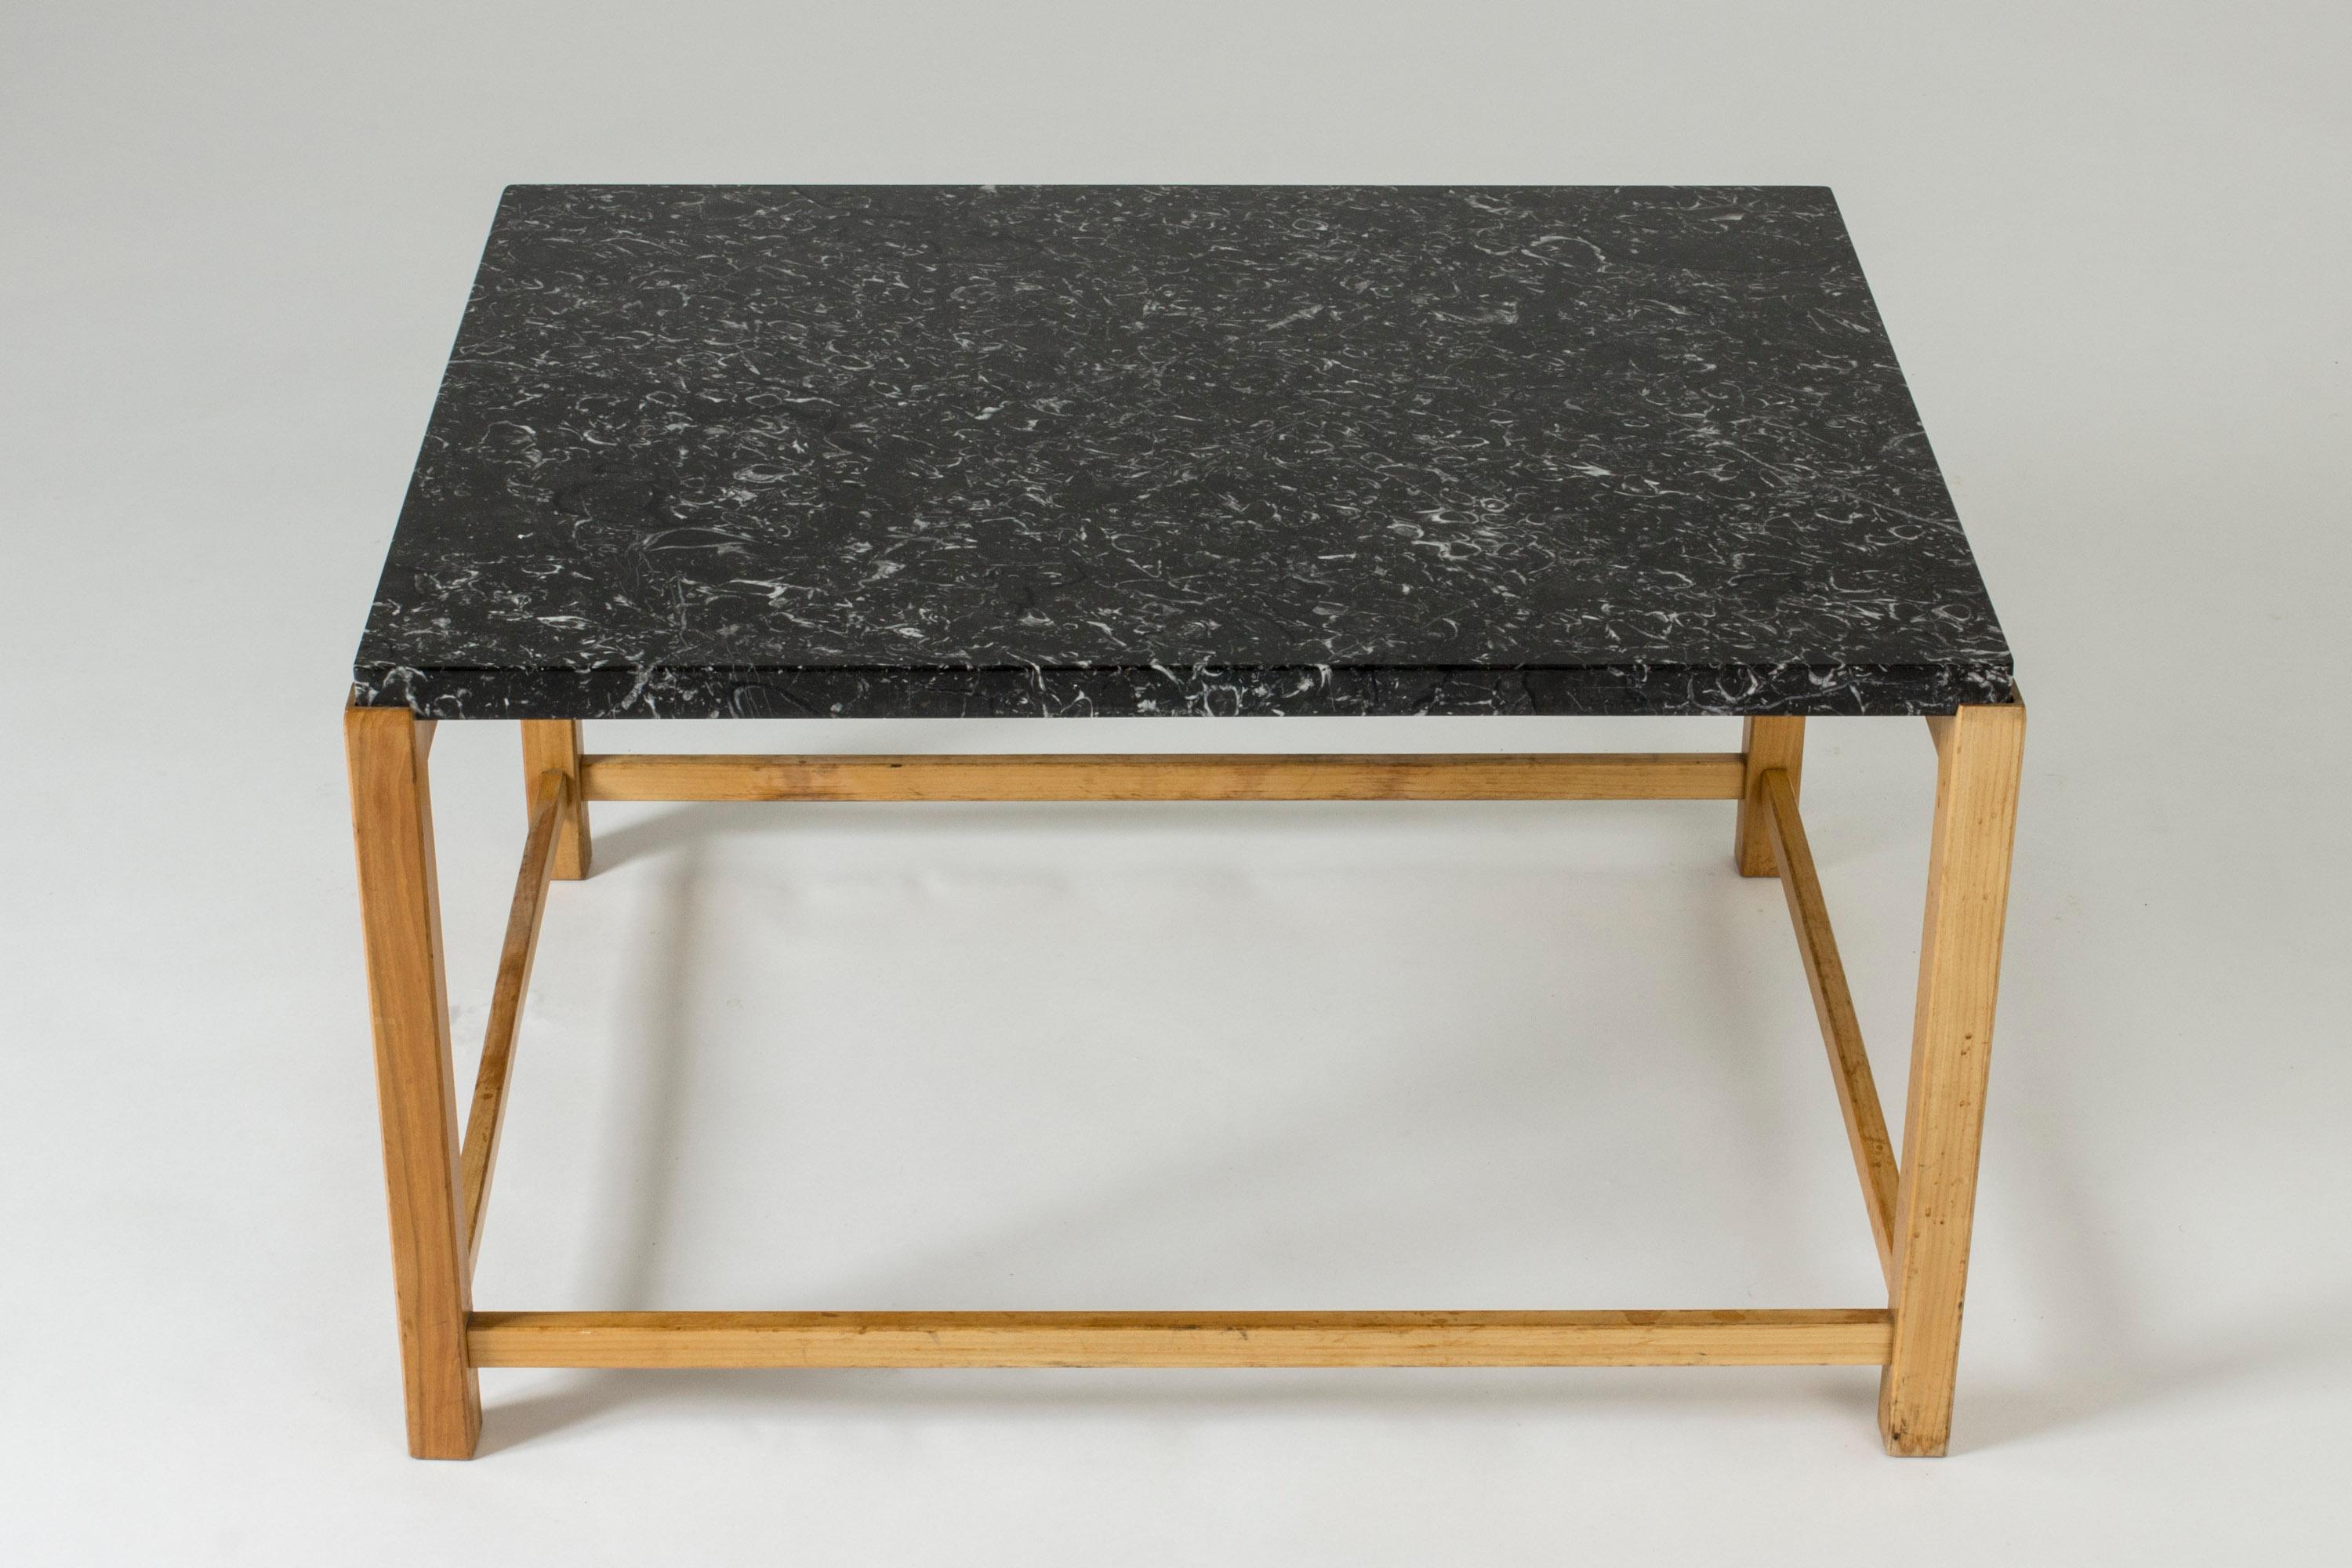 Very cool coffee or occasional table with a strict, open Silhouette and wonderful, lively black marble top. Elmwood base.